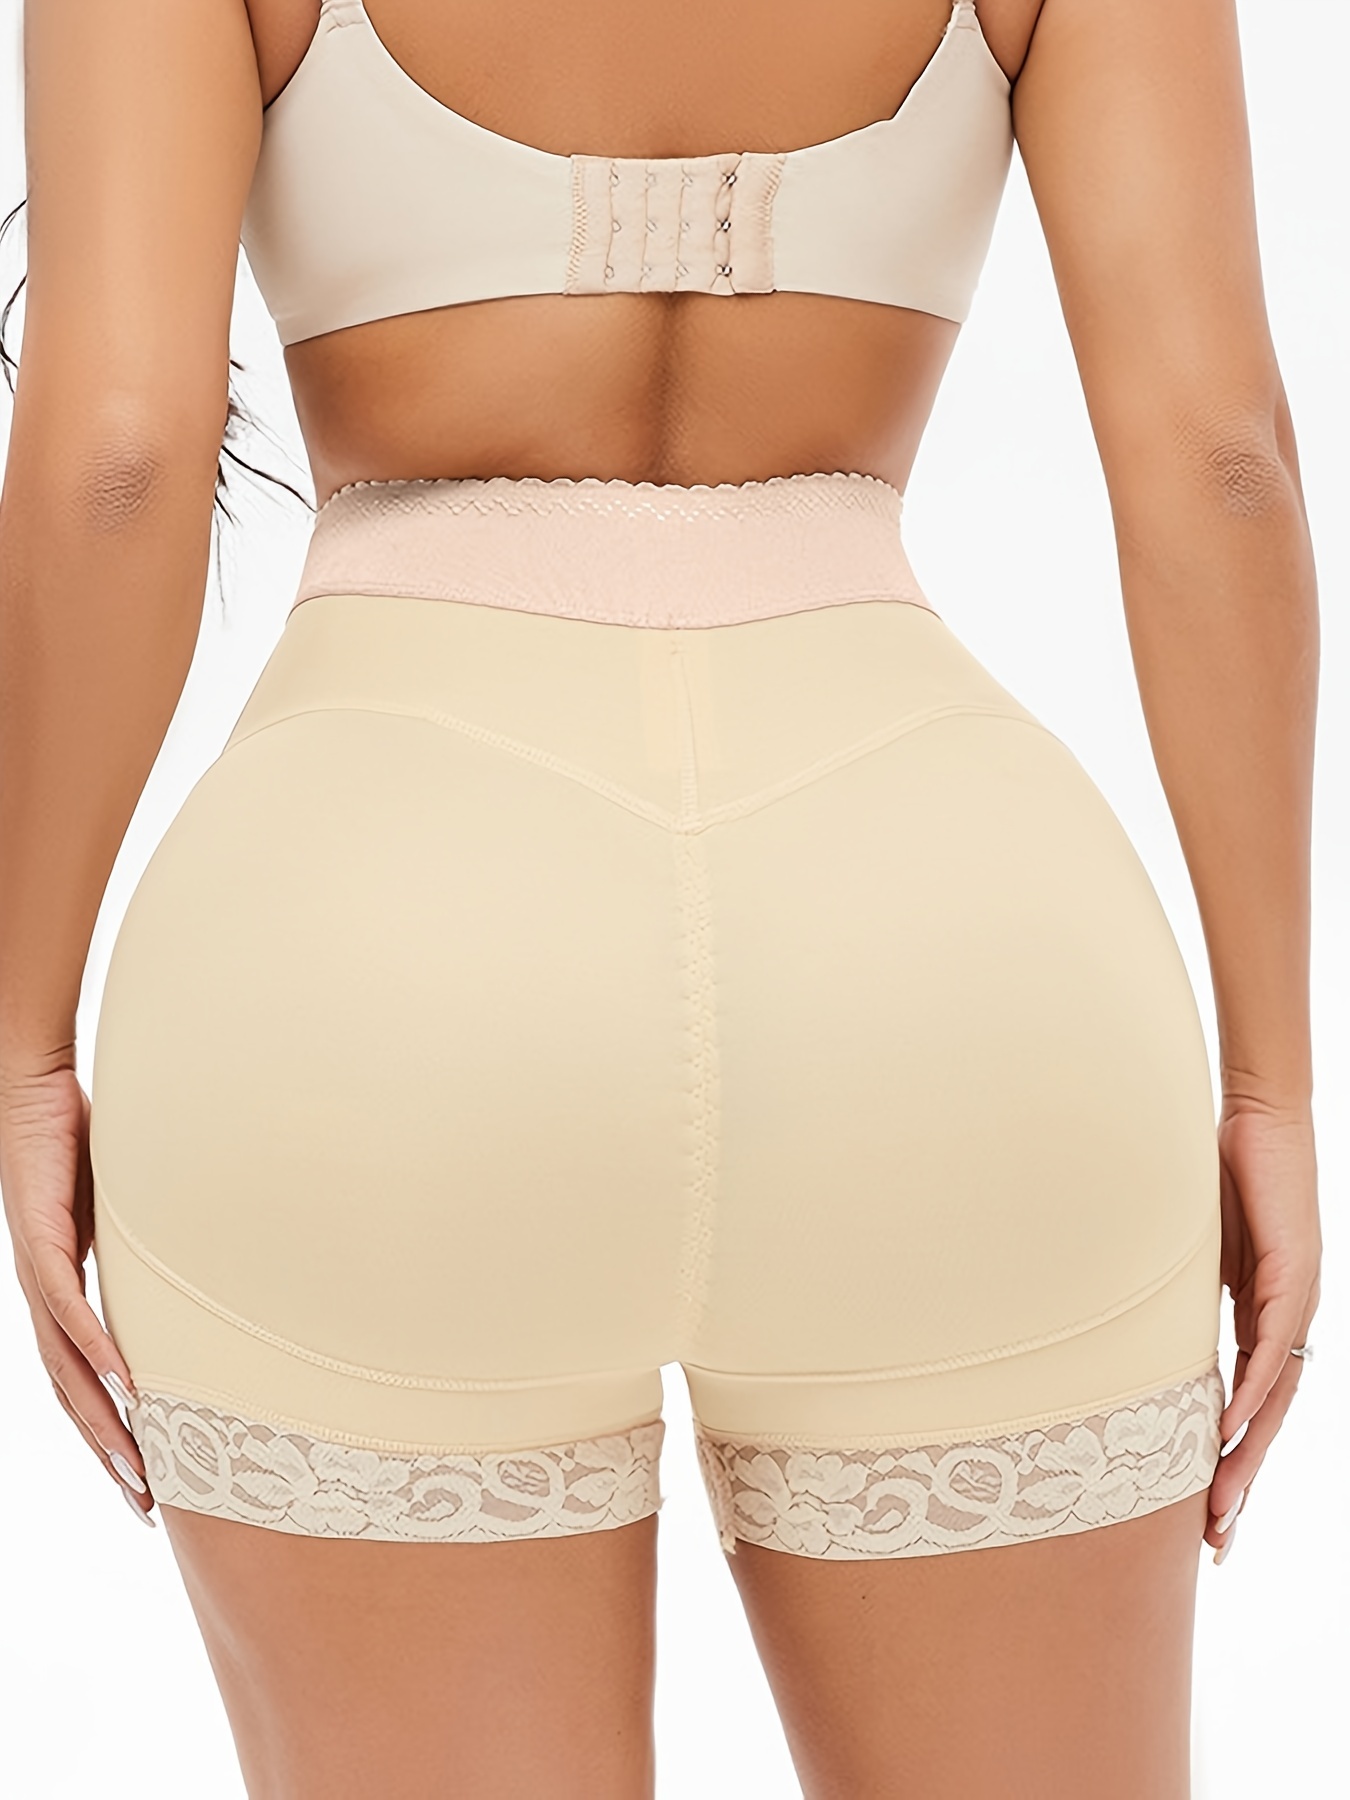 Seamless Butt And Hip Enhancer Booty Shorts For Women Body Shaper, Lifter,  And Boyshorts Butt Enhancing Shapewear From Mj_covenant, $30.24